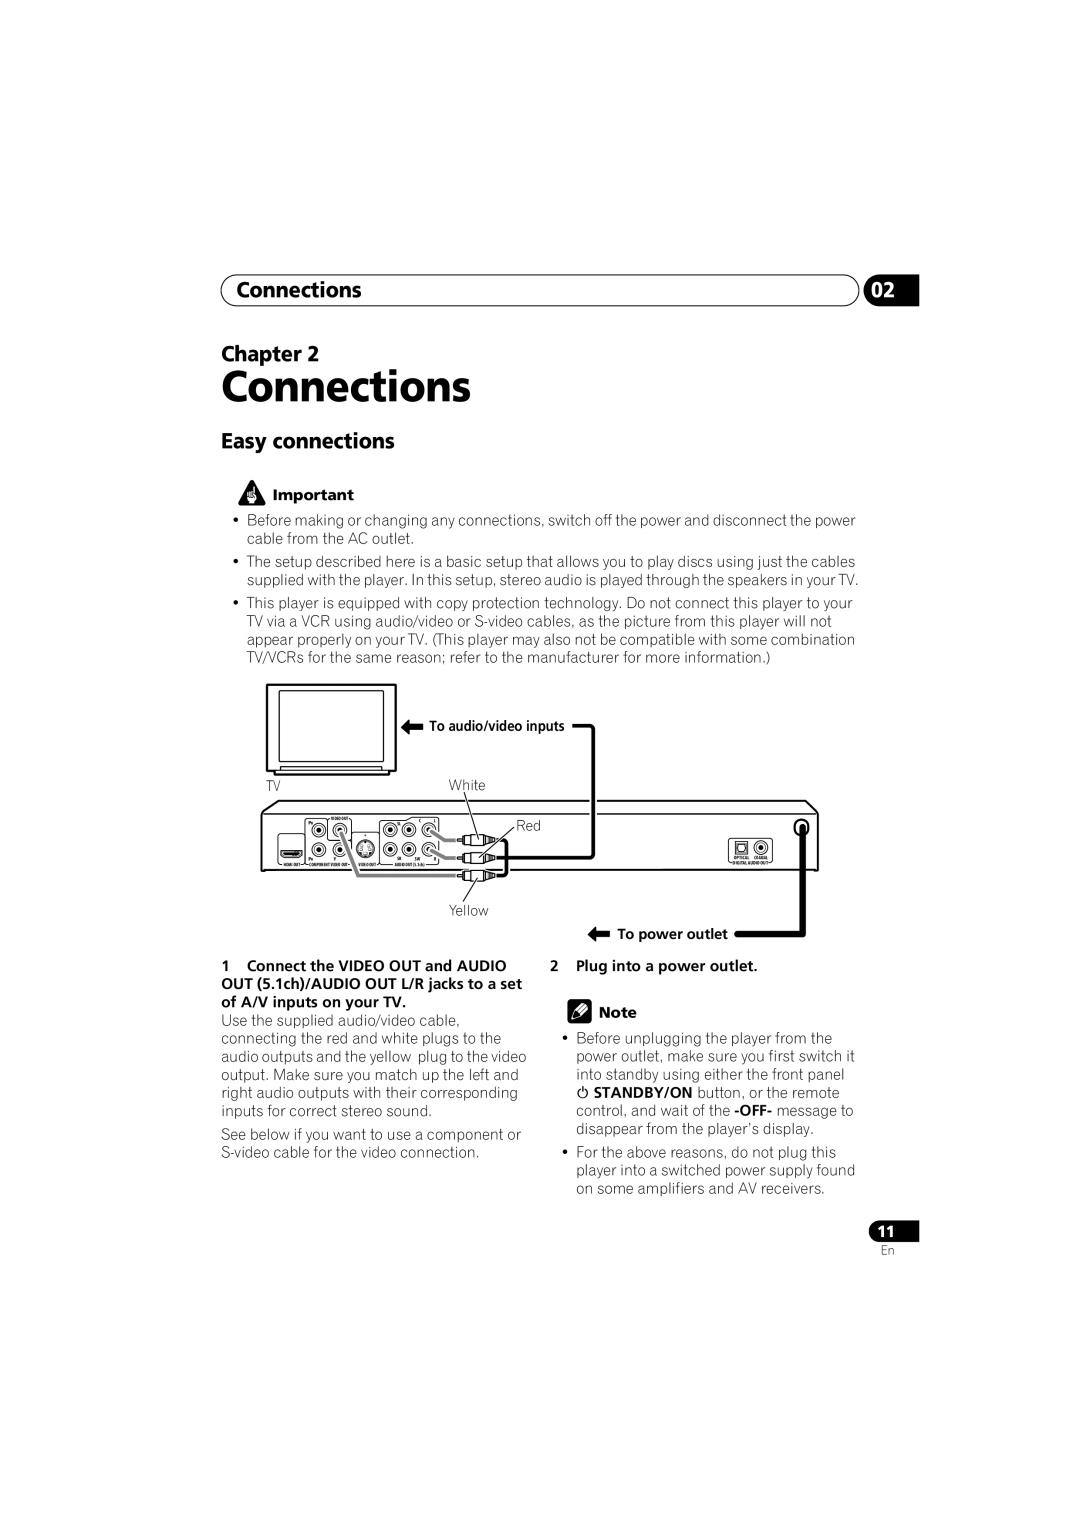 Pioneer DV-48AV Connections, Easy connections, Chapter, To audio/video inputs, To power outlet 2 Plug into a power outlet 